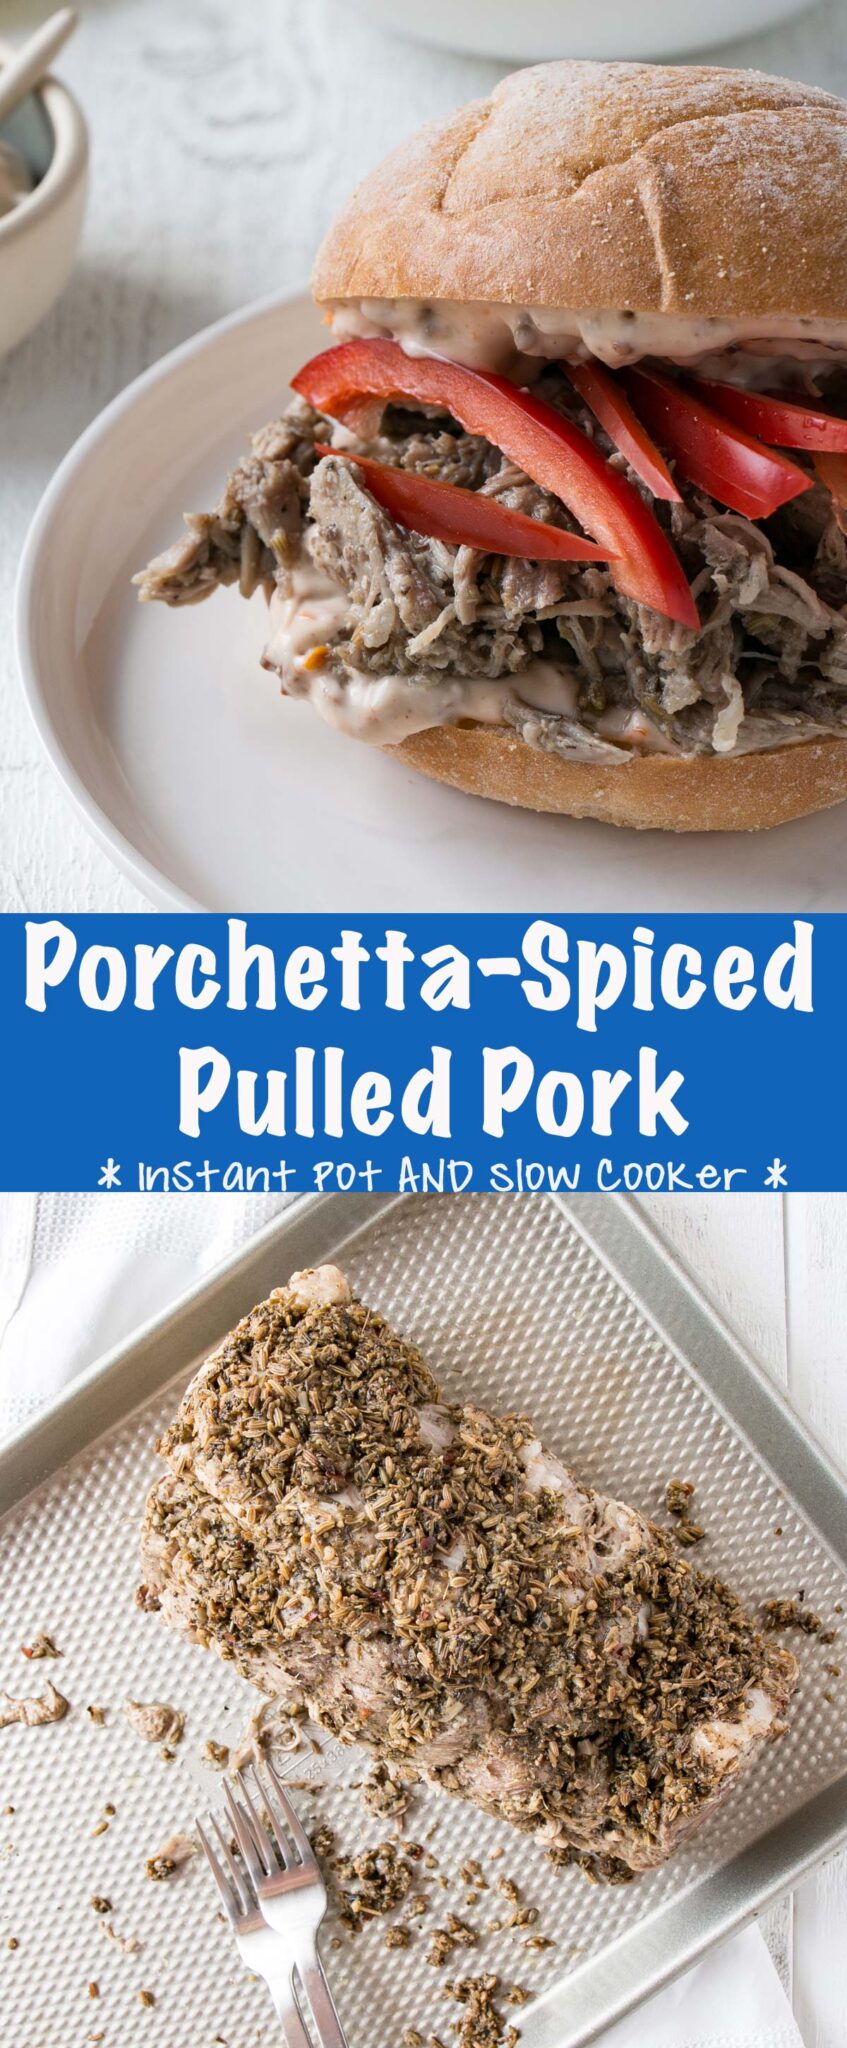 Porchetta-Spiced Pulled Pork in a sandwich and on a baking tray. 